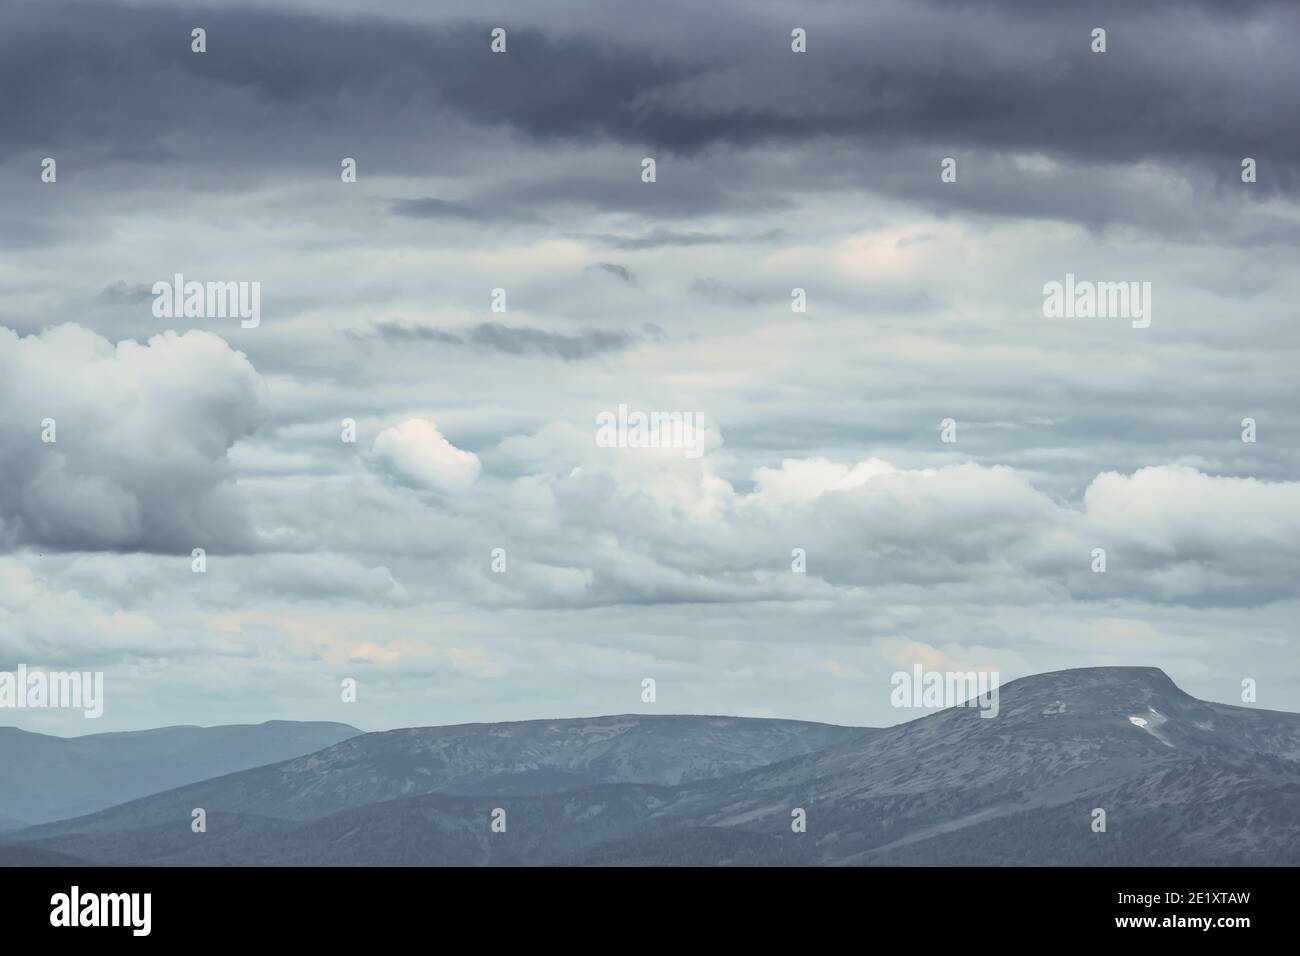 Thick clouds over mountain range, hills in blue haze Stock Photo